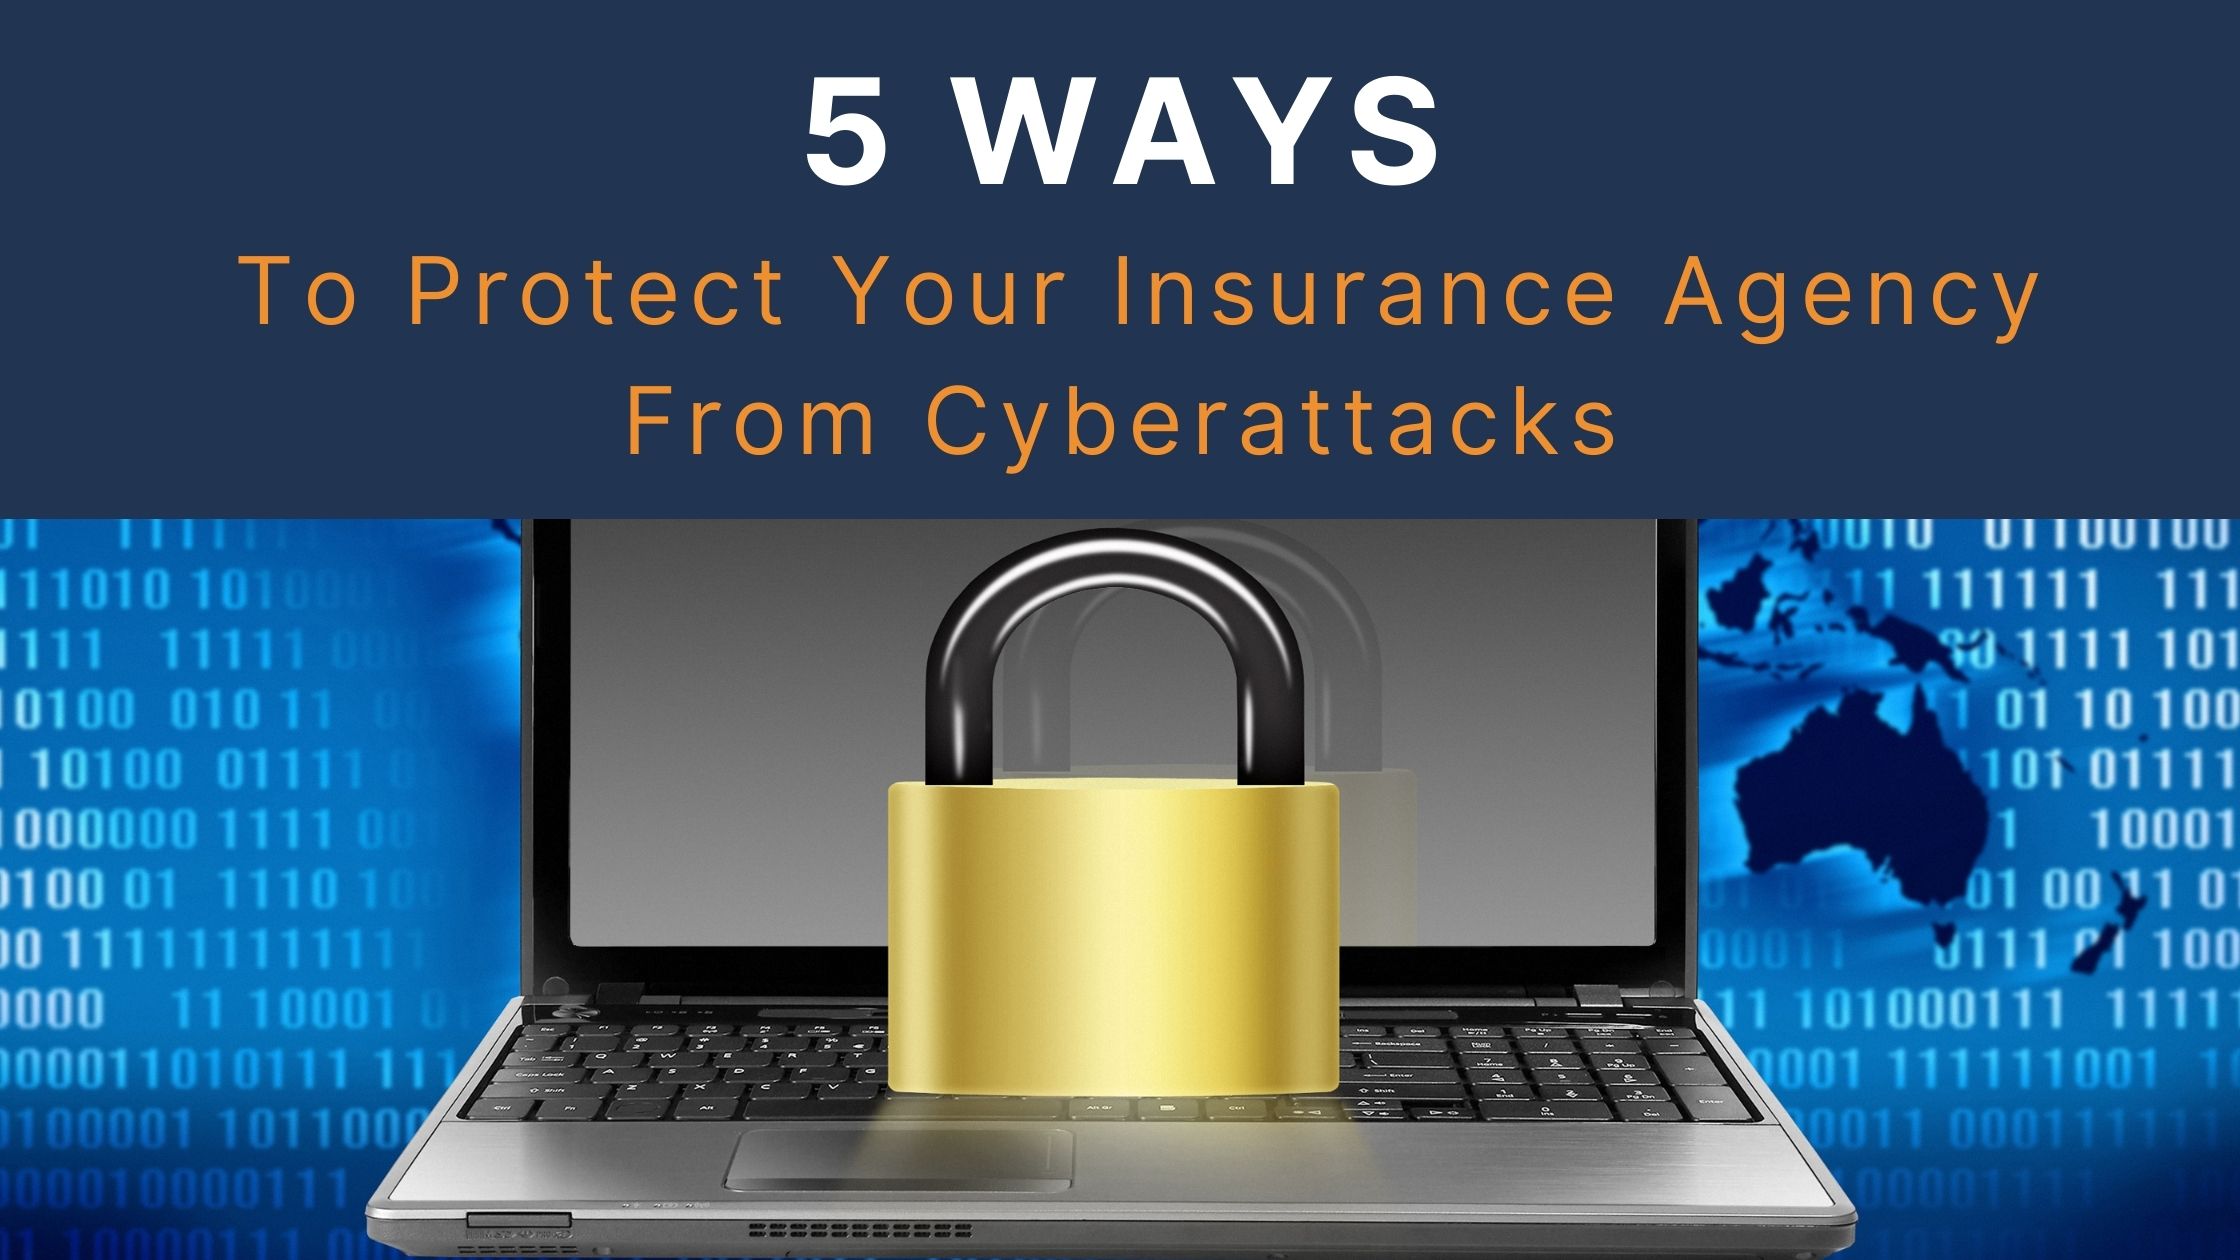 5 Ways To Protect Your Insurance Agency From Cyberattacks